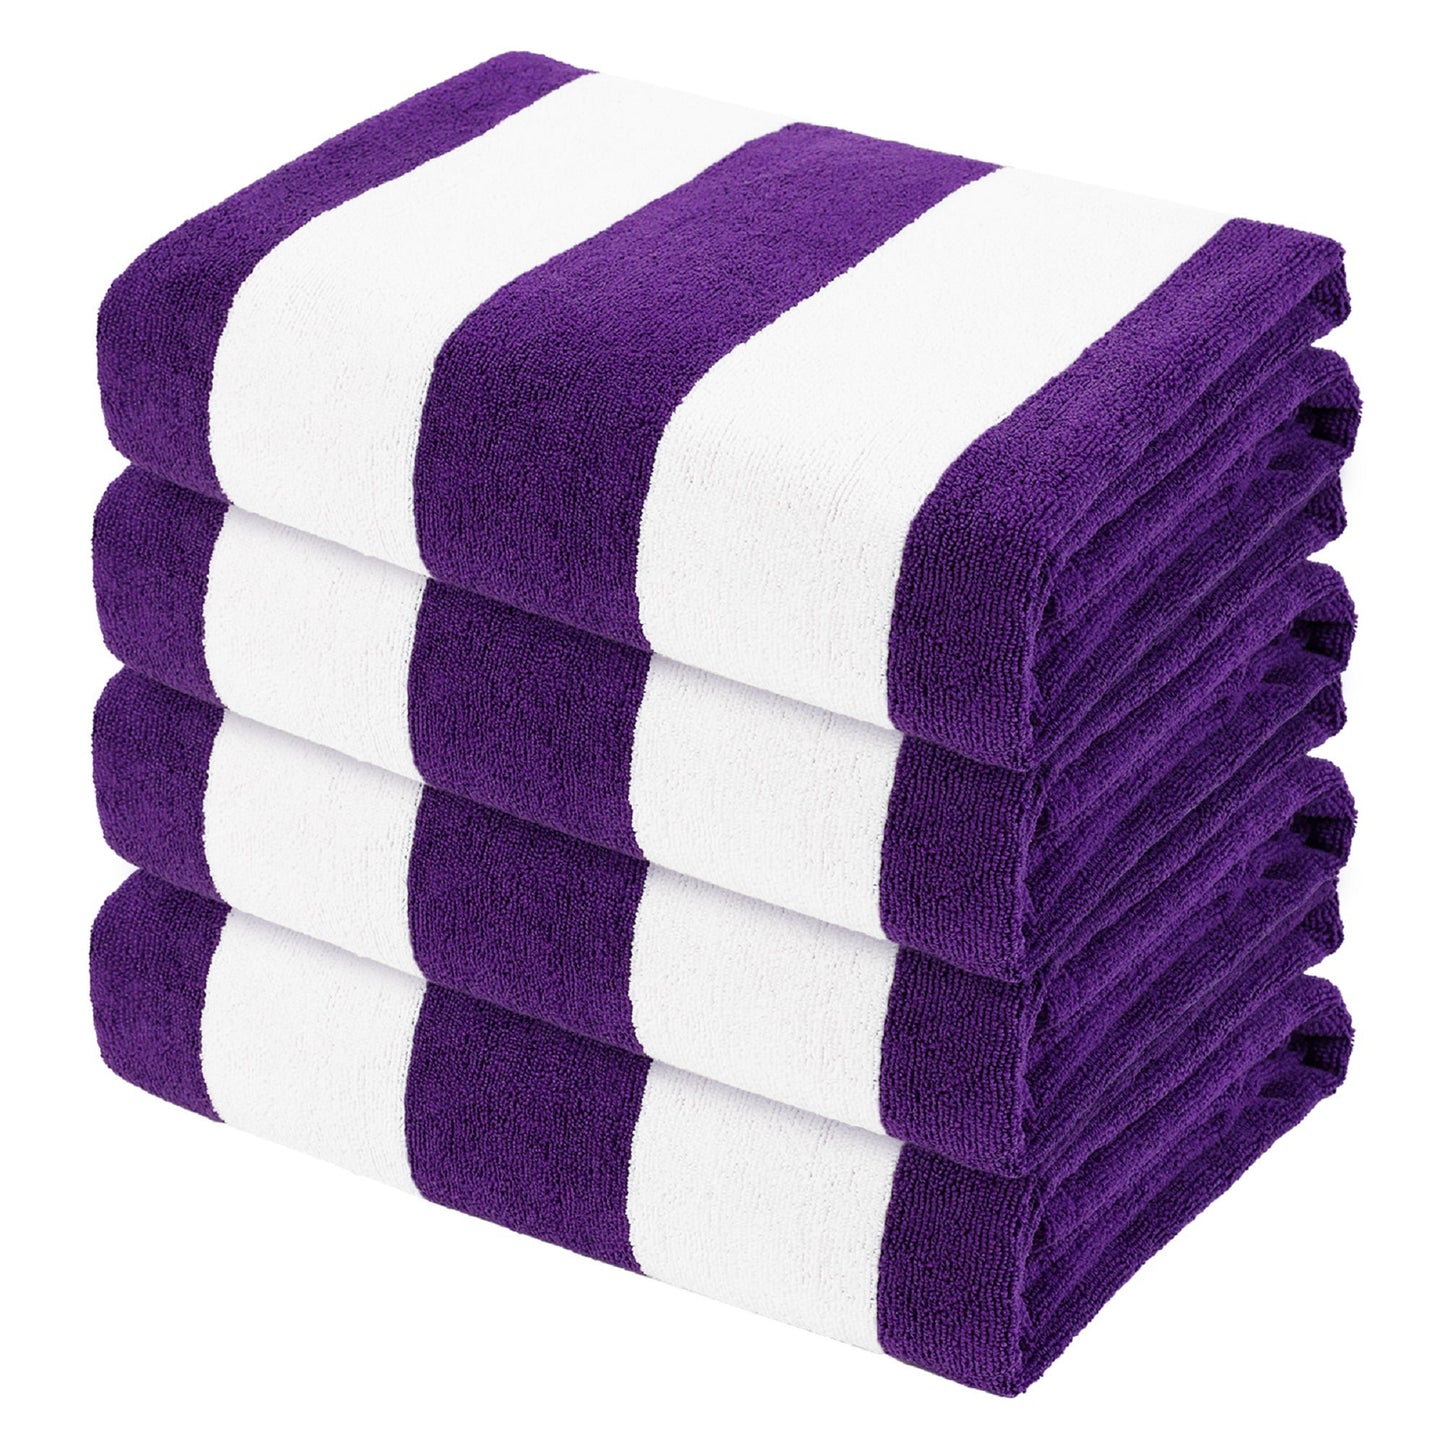 Exclusivo Mezcla 4-Pack Large Microfiber Beach Towels Set (Purple, 30" x 60"), Quick Dry, Cabana Striped Pool/Swimming/Bath Towel for Adults/Kids, Lightweight and Highly Absorbent